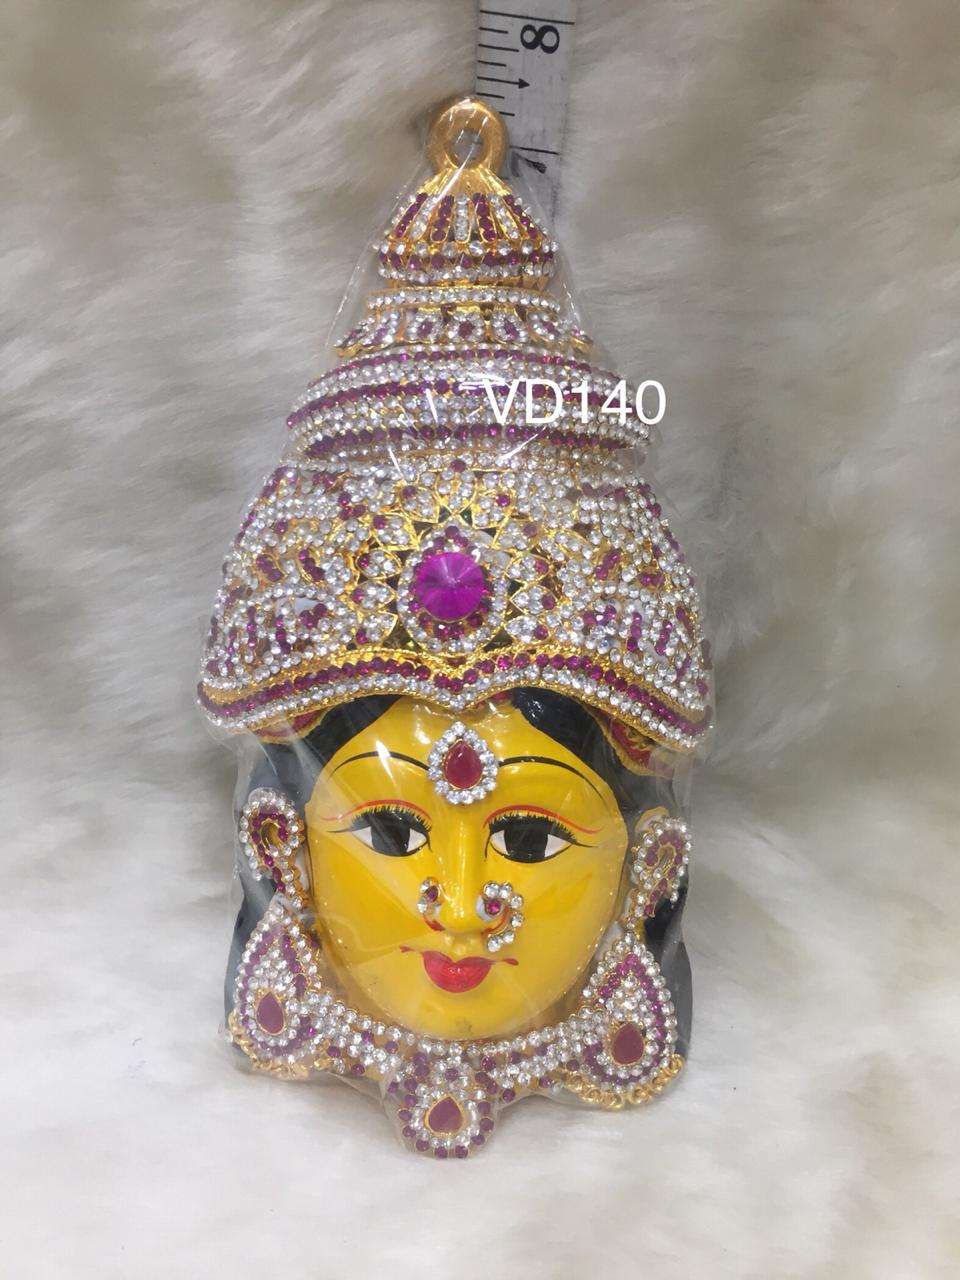  Graceful face of Varalakshmi adorned with a majestic golden crown, embodying her divine status as the bestower of wealth and prosperity.